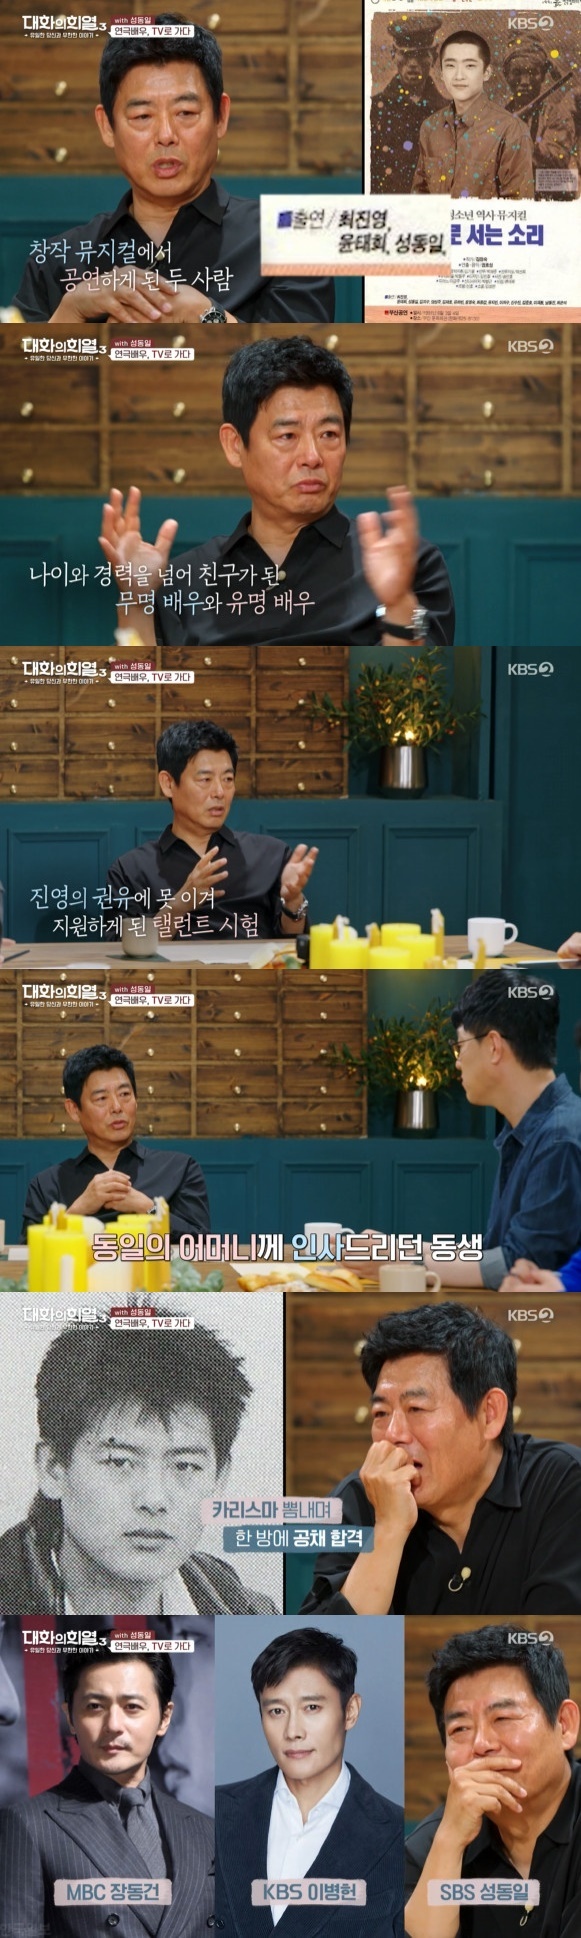 Seoul = = Hye-Yeol 3 of Dialogue actor Sung Dong-il revealed his relationship with the late Choi Jin-young.In the KBS 2TV entertainment program Hye Yeol 3 broadcasted on the afternoon of the 22nd, actor Sung Dong-il, who plays the joy of life, appeared as a guest.Sung Dong-il revealed that Kim Youngs words that he liked it were freshly shocked and entered Kim Youngs path.He came to the stage and felt a thrilling thrill with the attention of the crowd. He thought, I do not have money.However, Sung Dong-il made his debut in 1991 with the support of SBS 1st Bond Actor test because he thought he could not suffer his mother anymore.Sung Dong-il supported the test at the urging of the late Choi Jin-yeong.He made a connection with Choi Jin-young with his creative musical Story to Us, and he went to Choi Jin-youngs house and met Choi Jin-sil.He said, It was my brother who came to the ring of the room and greeted my mother.Sung Dong-il, who cut off the pamphlet of the play and gave support, passed the bond with pride and was introduced to MBC Jang Dong-gun and KBS Lee Byung-hun as a new prospect Troika.On the other hand, KBS 2TV entertainment program Hye Yeol 3 of Dialogue is a talk mentor program that continues to talk with One person who wants to meet right now, and the name of a solo talk show. It is broadcast every Thursday at 11:20 pm.